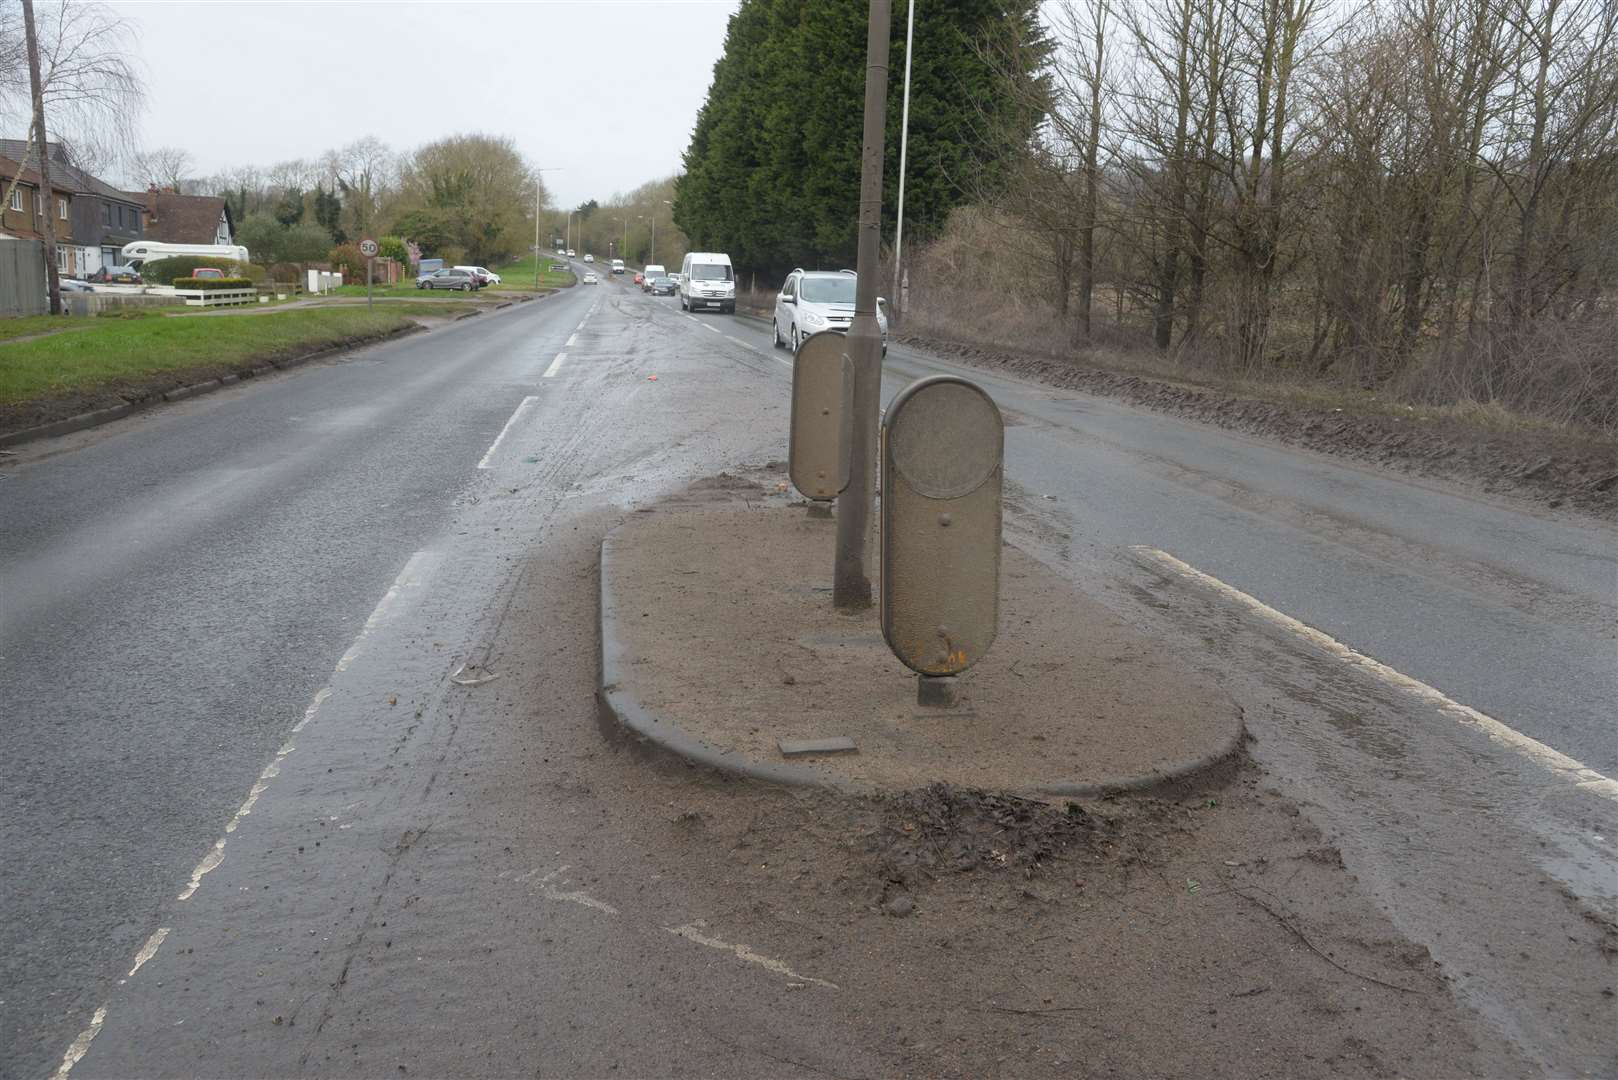 The mud covered island on London Road at Wrotham near the Invicta Business Park